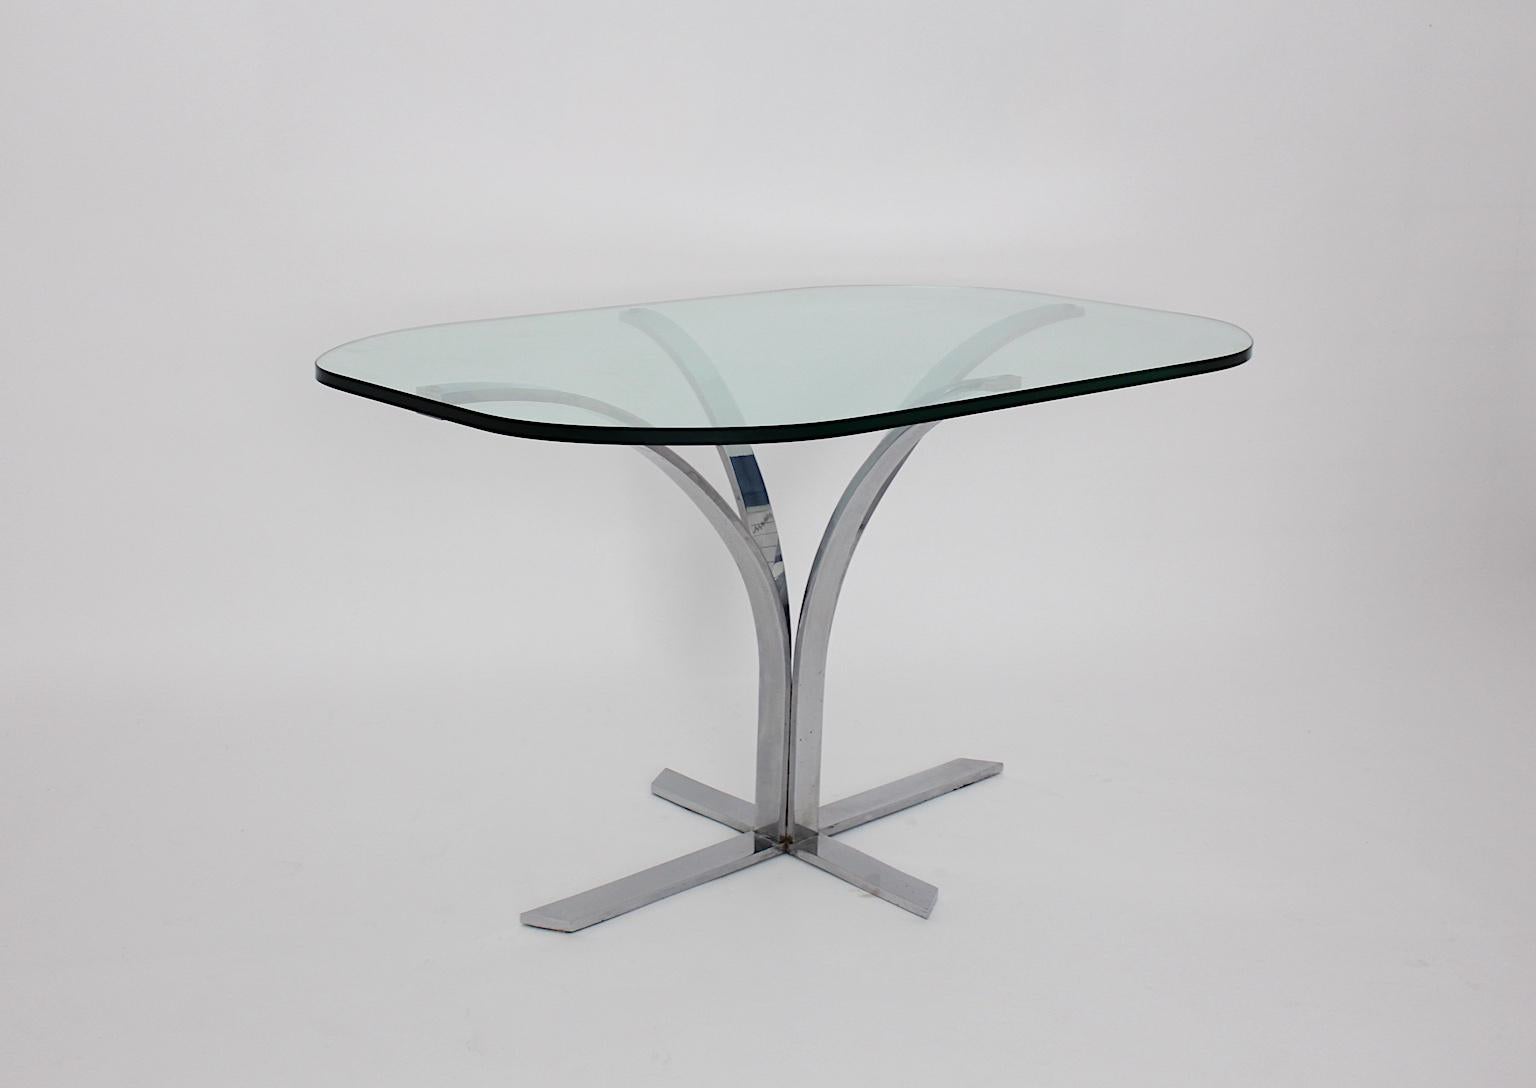 Space Age Chromed Metal Vintage Dining Table or Writing Table, 1960s, Germany For Sale 3